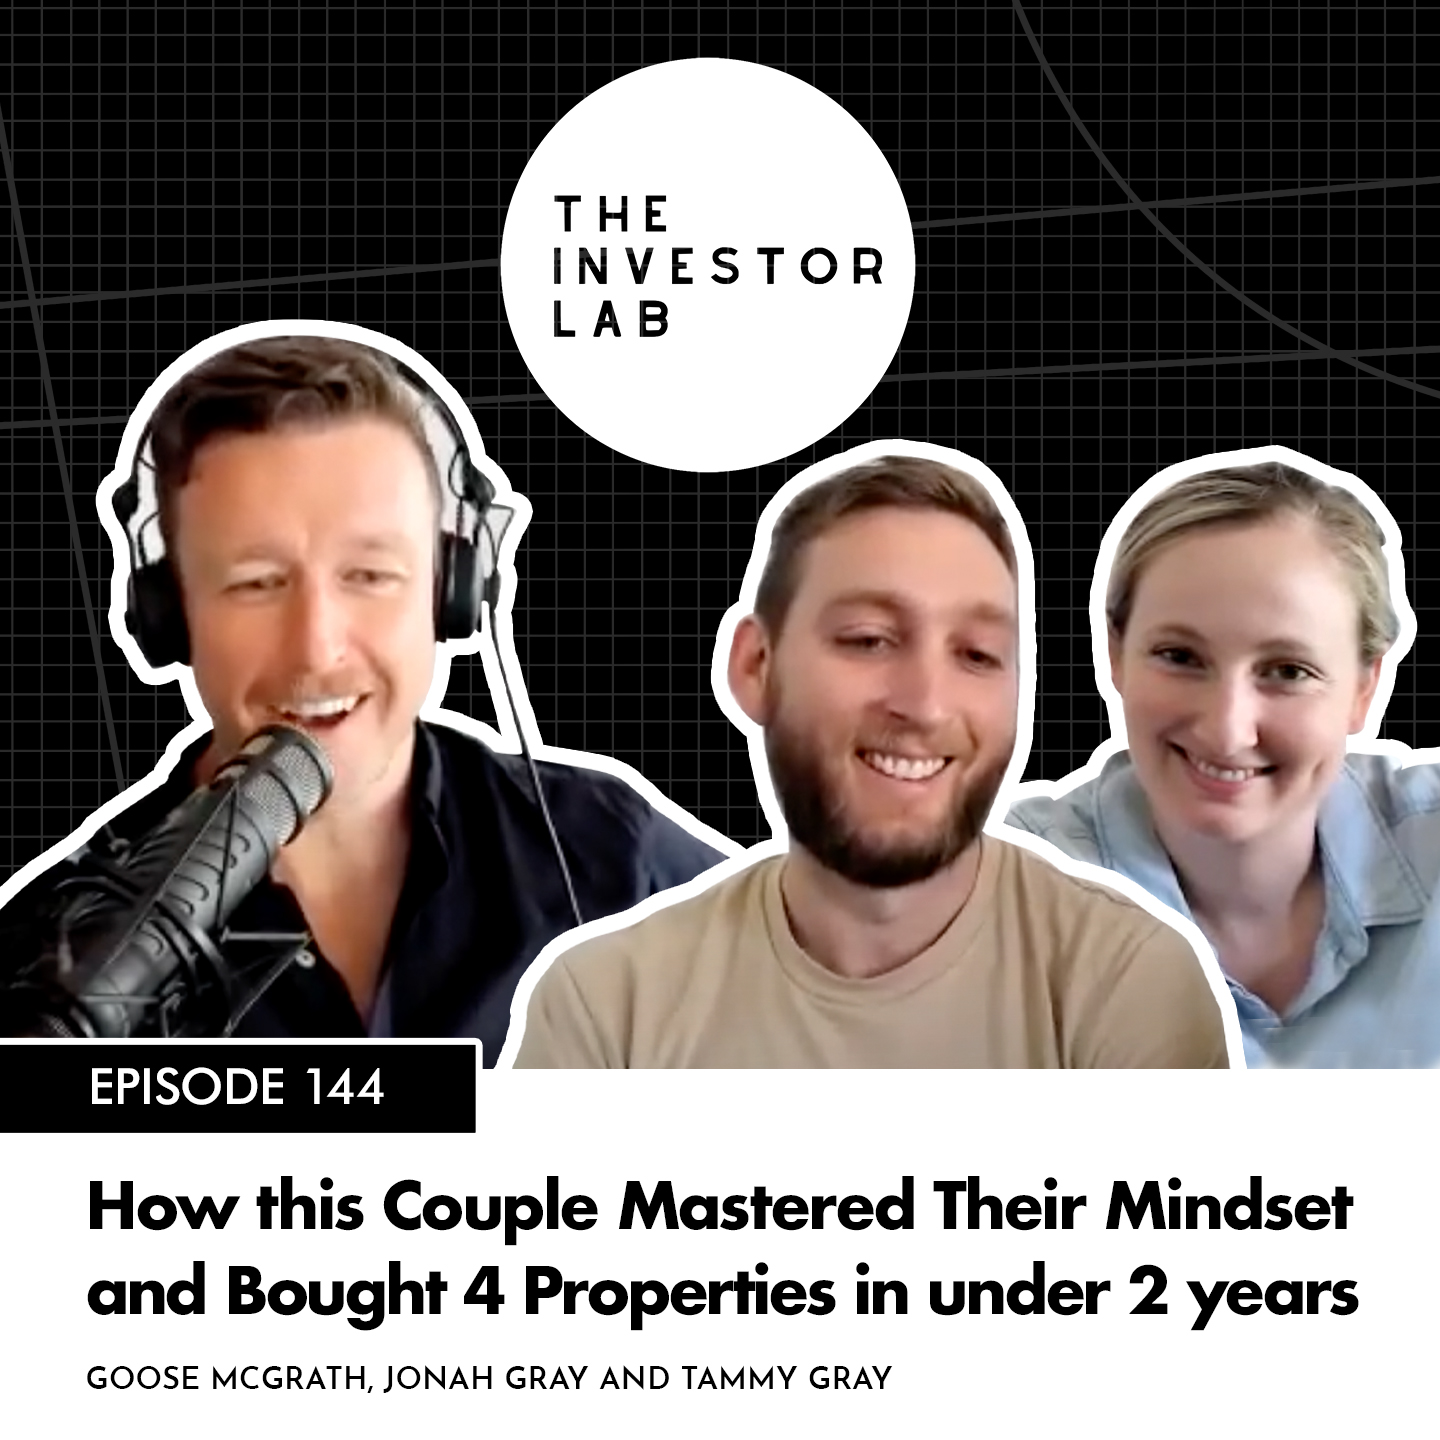 How this Couple Mastered Their Mindset and Bought 4 Properties in under 2 years